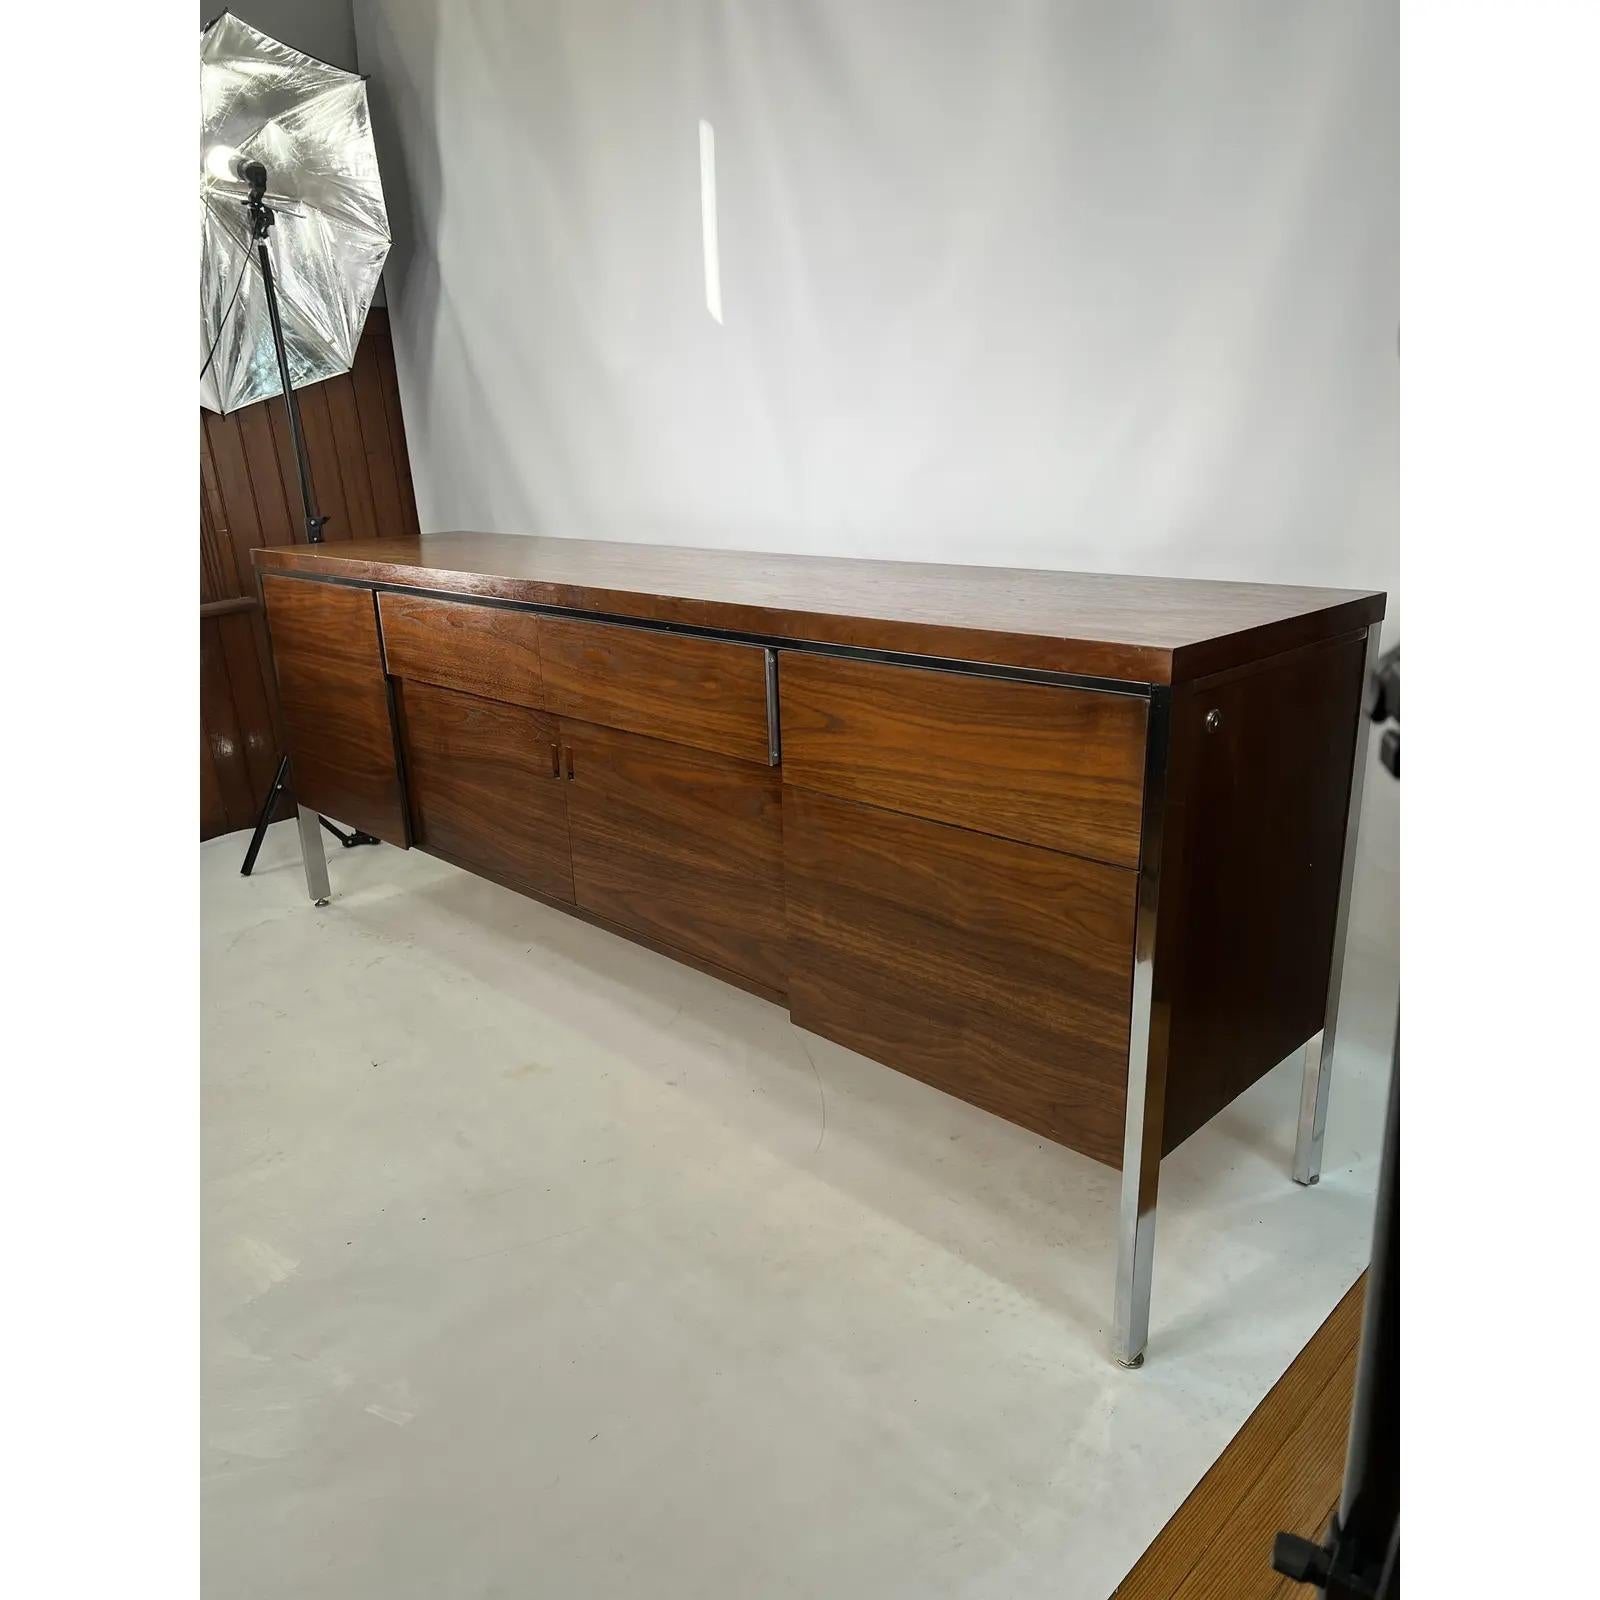 This mid-century Knoll style walnut credenza is made by Jofco. The credenza was made with amazing craftsmanship. It is stylish and sleek and is perfect for your home or office.